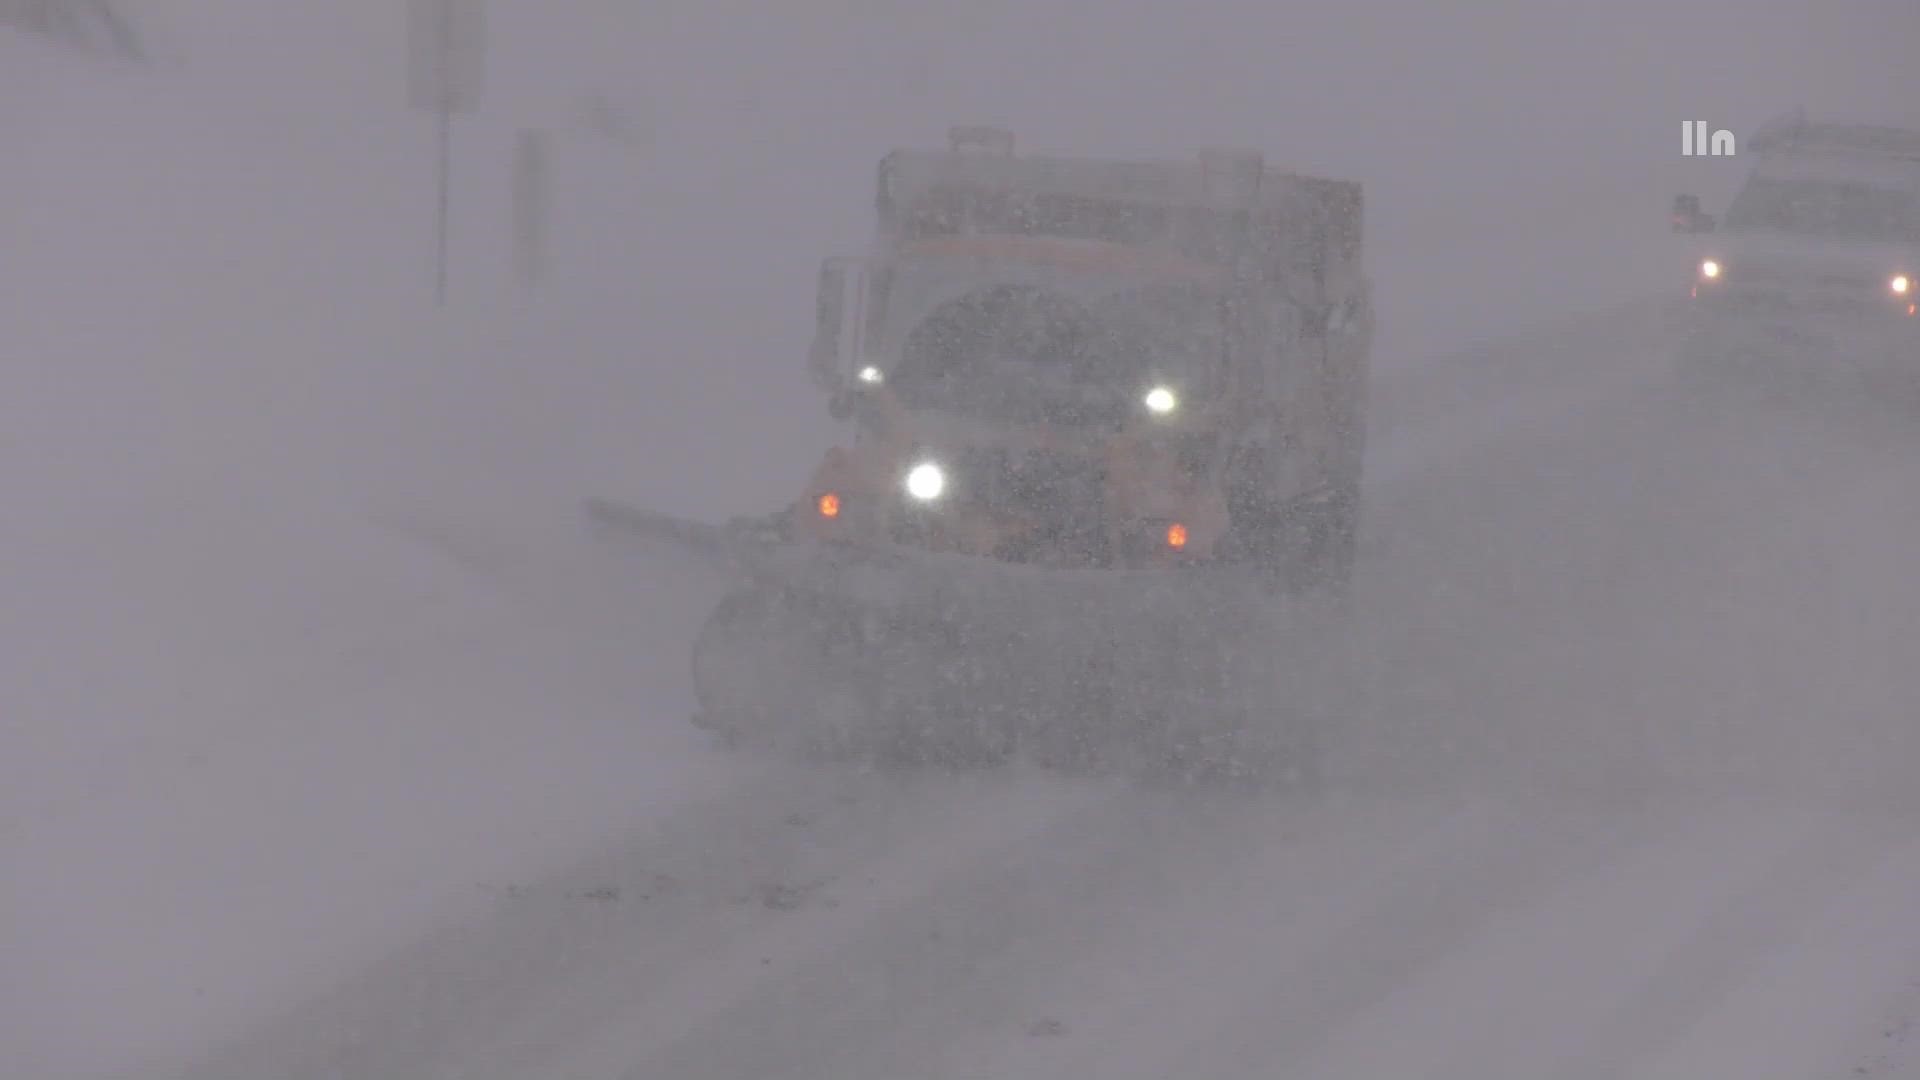 Snow plows clear the city streets in Flagstaff amid a major winter storm Monday. VIDEO COURTESY: LLN AZ